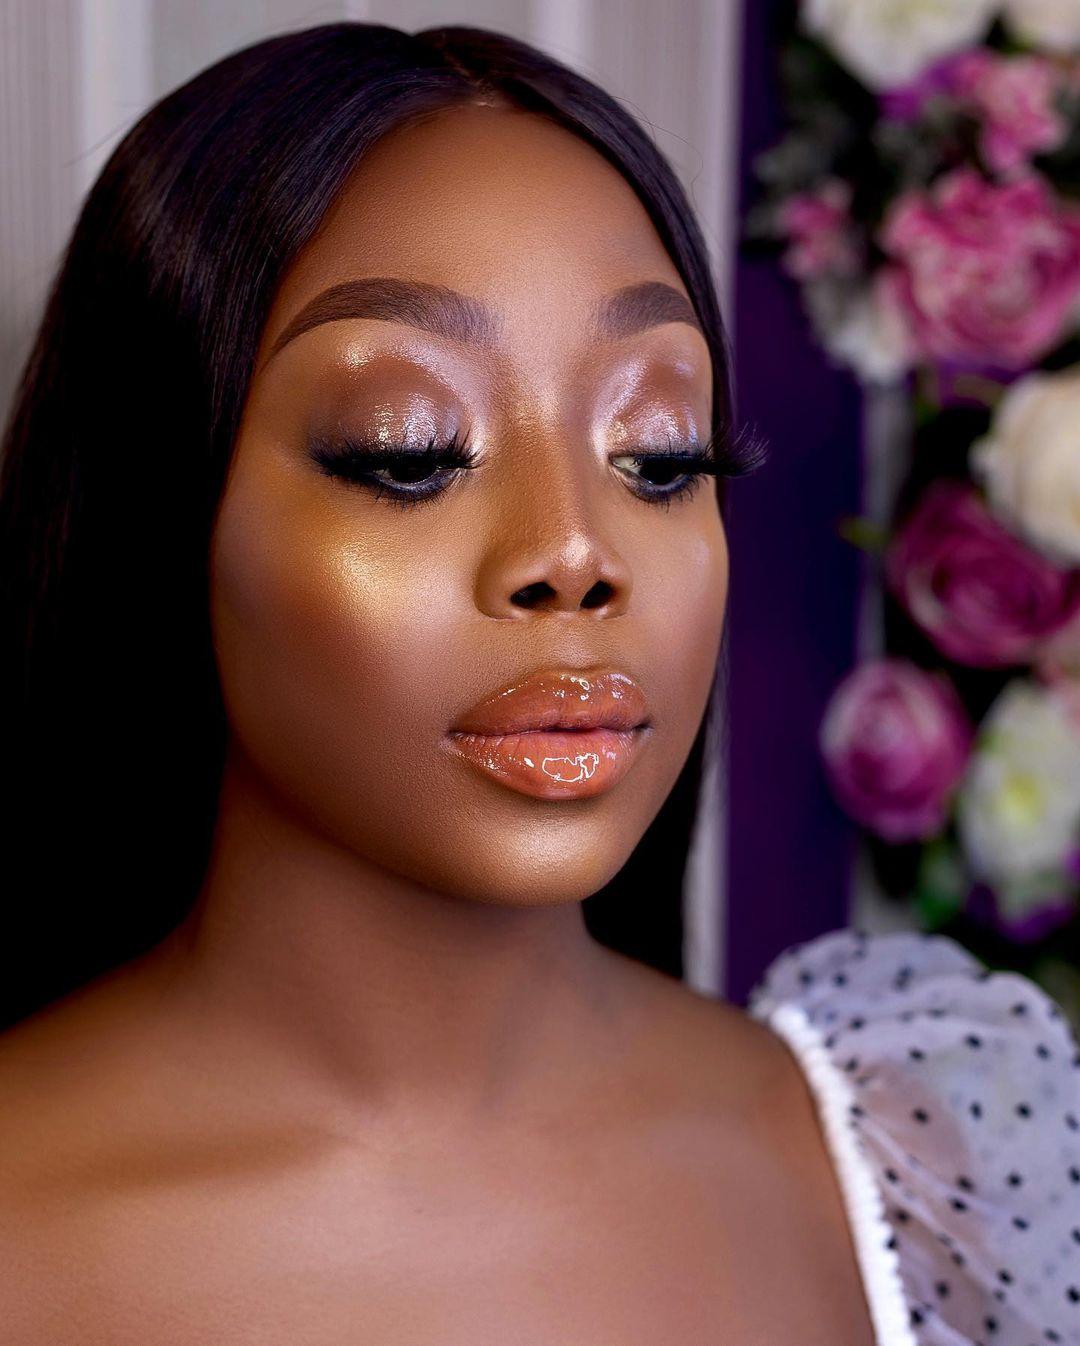 Black Makeup Artists to Follow on Instagram